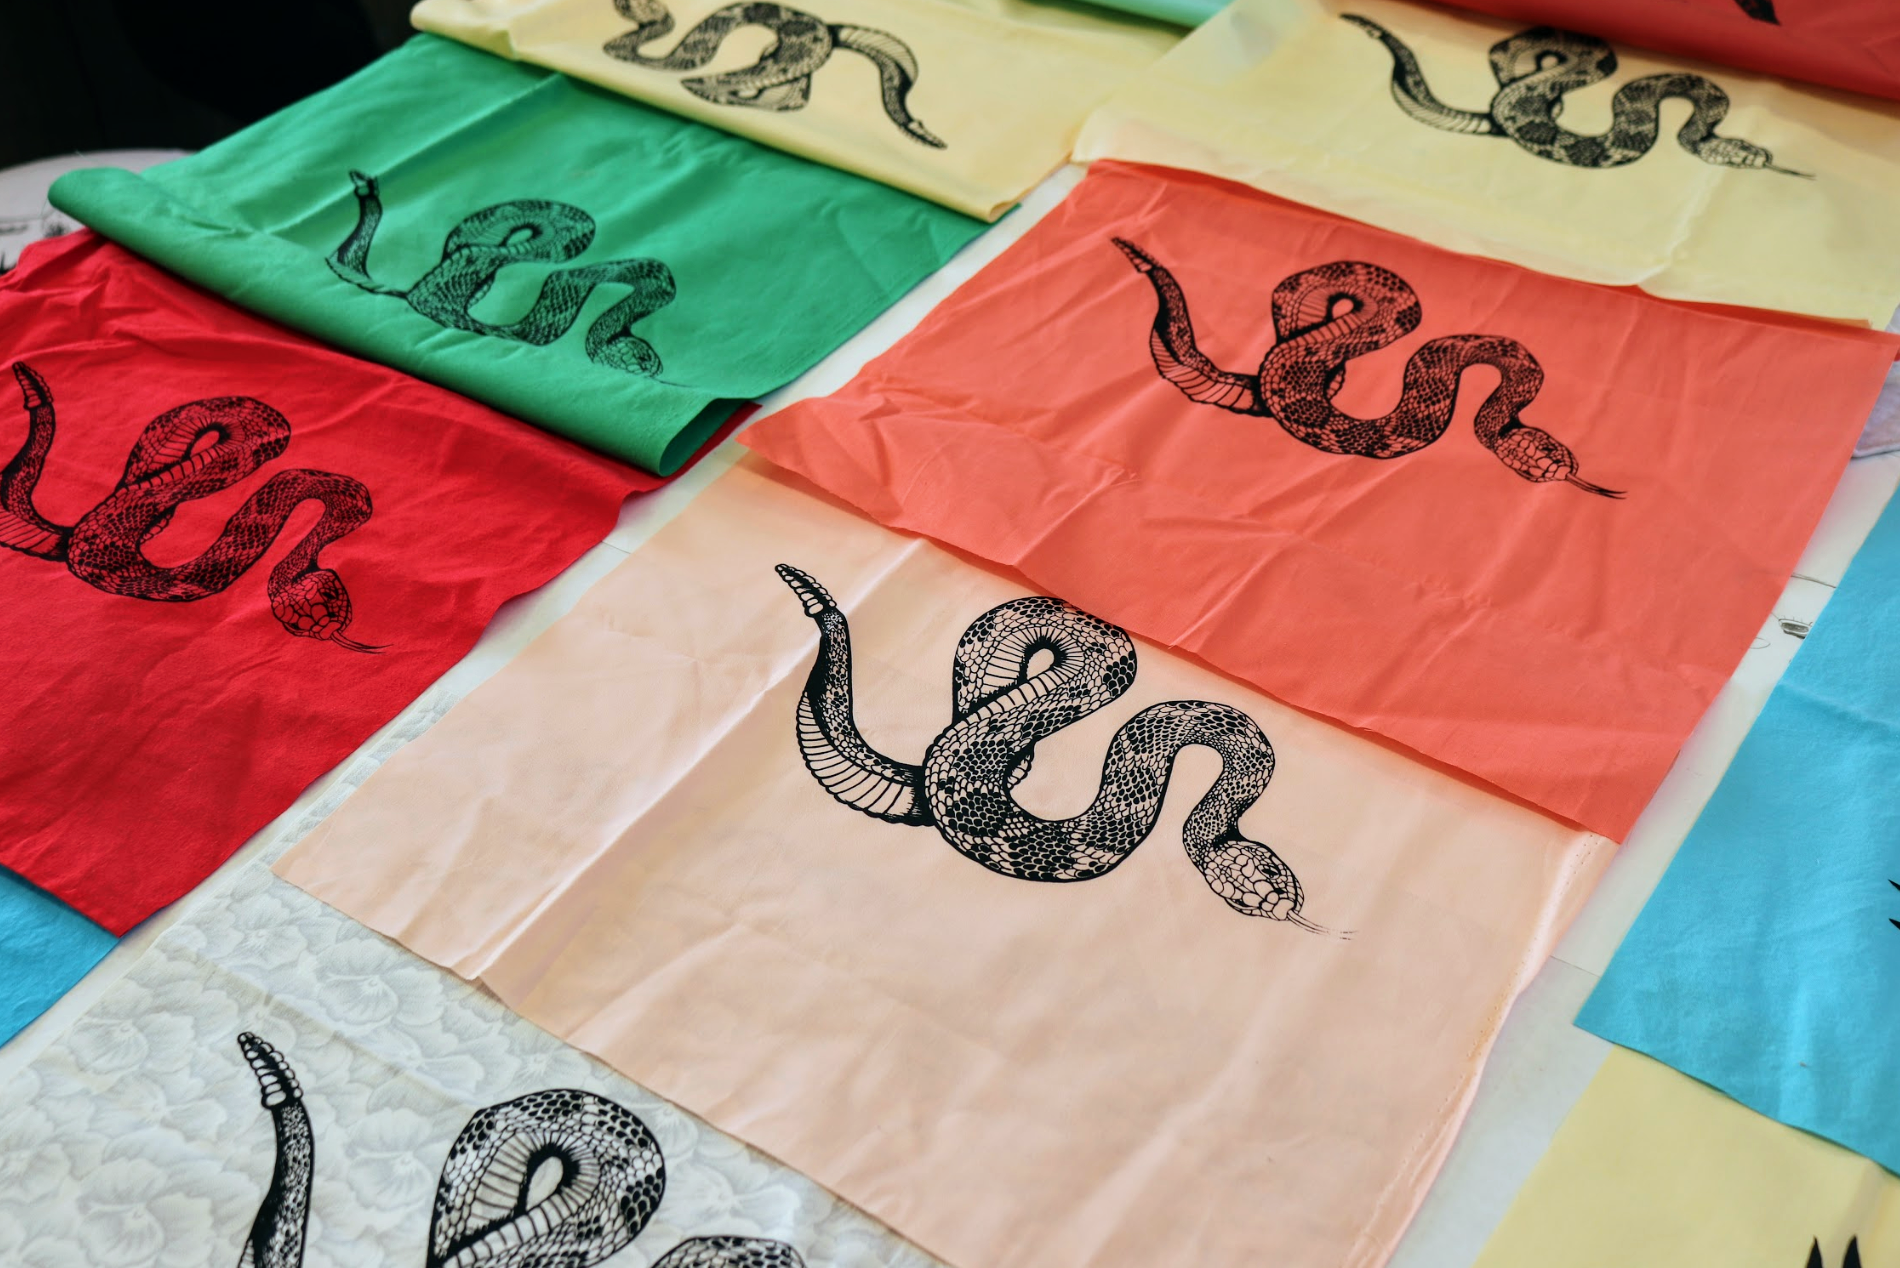 papel picado with endangered animals on it